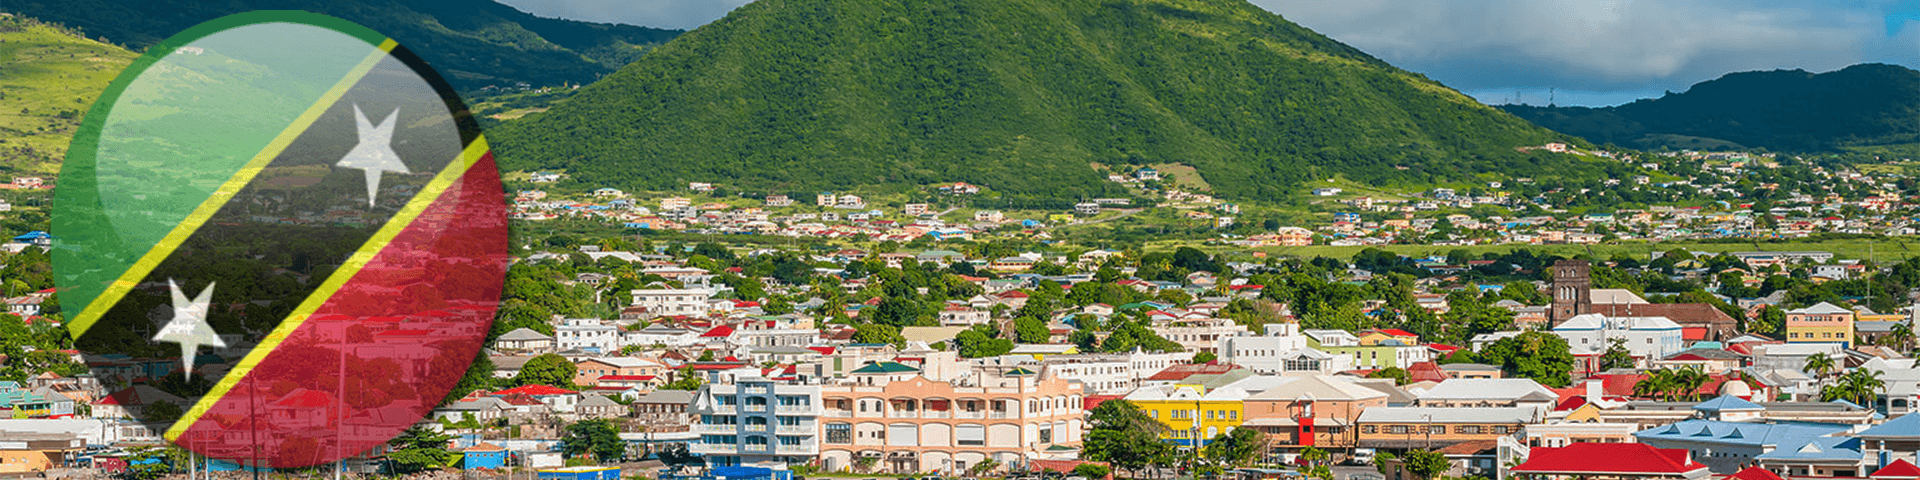 St. Kitts and Nevis banner image